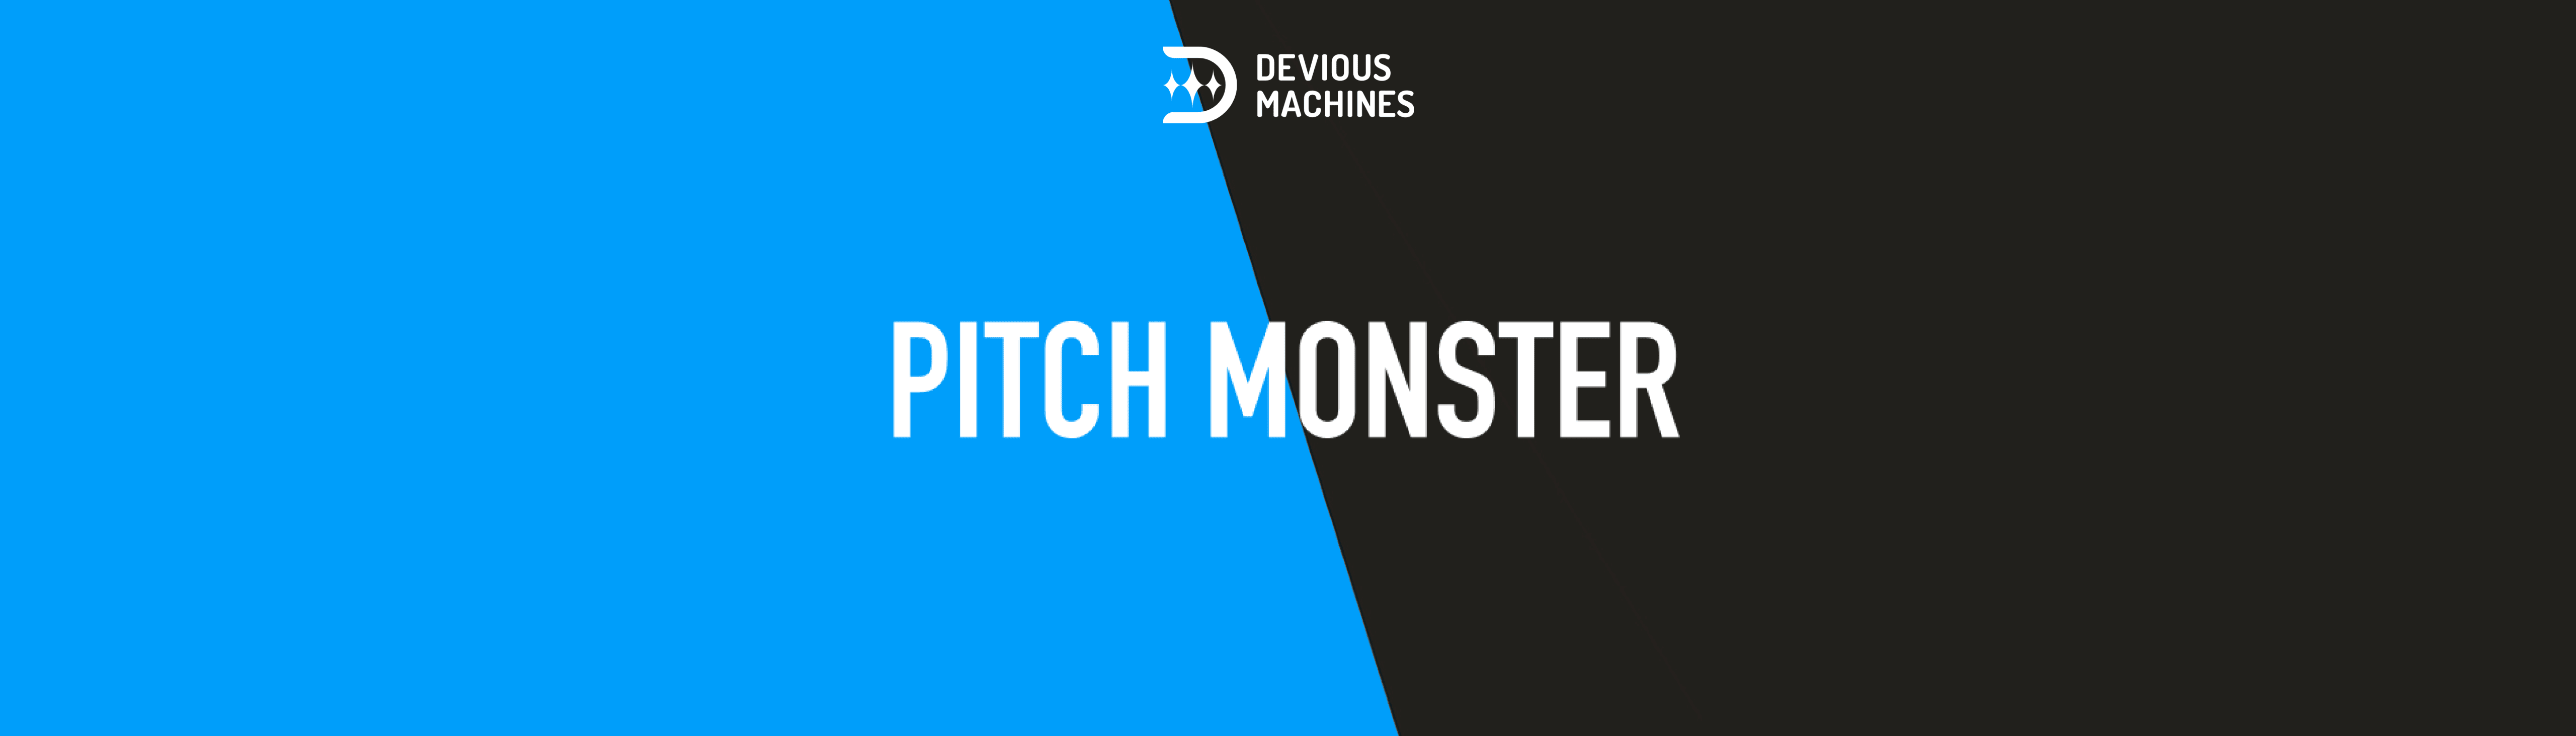 Devious Machines Pitch Monster